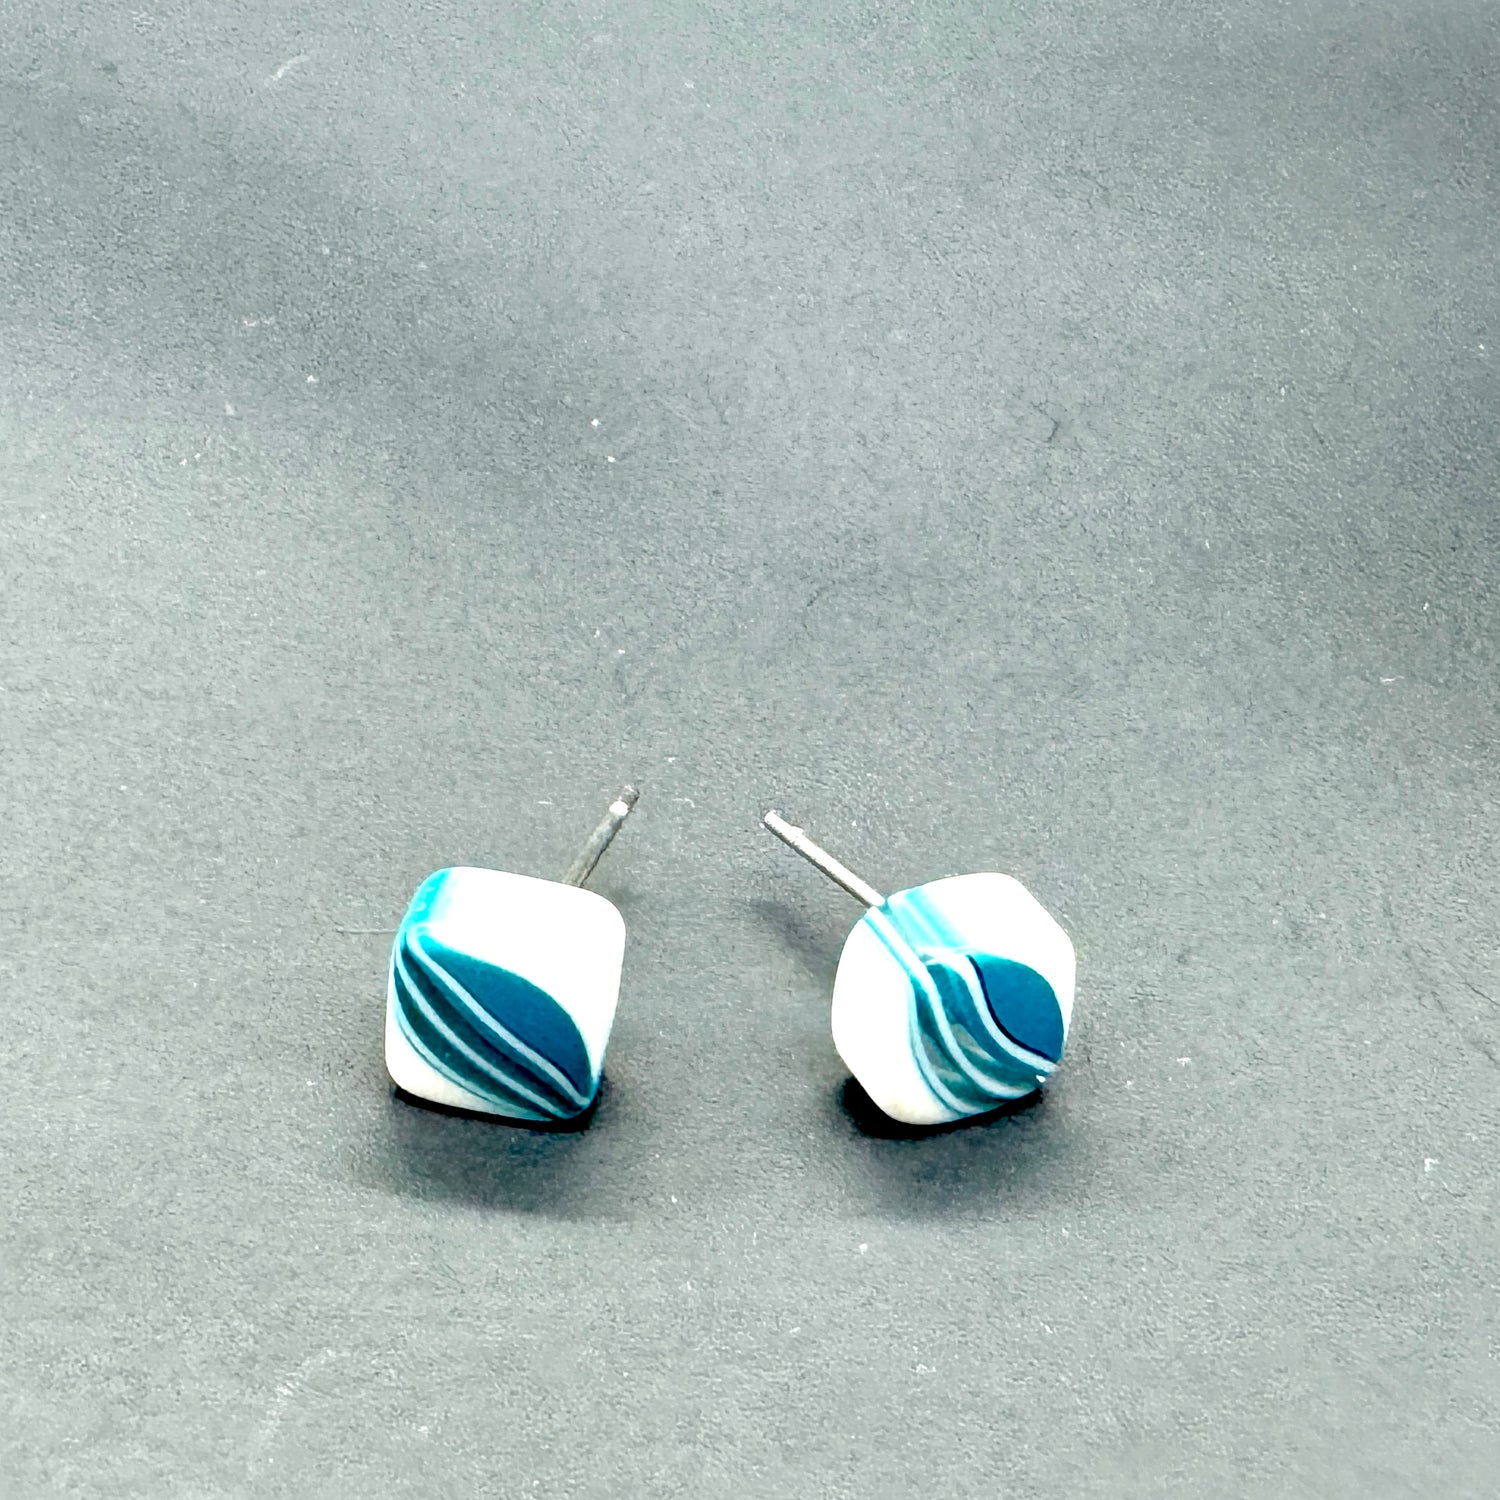 blue white and clear stud earrings square shaped